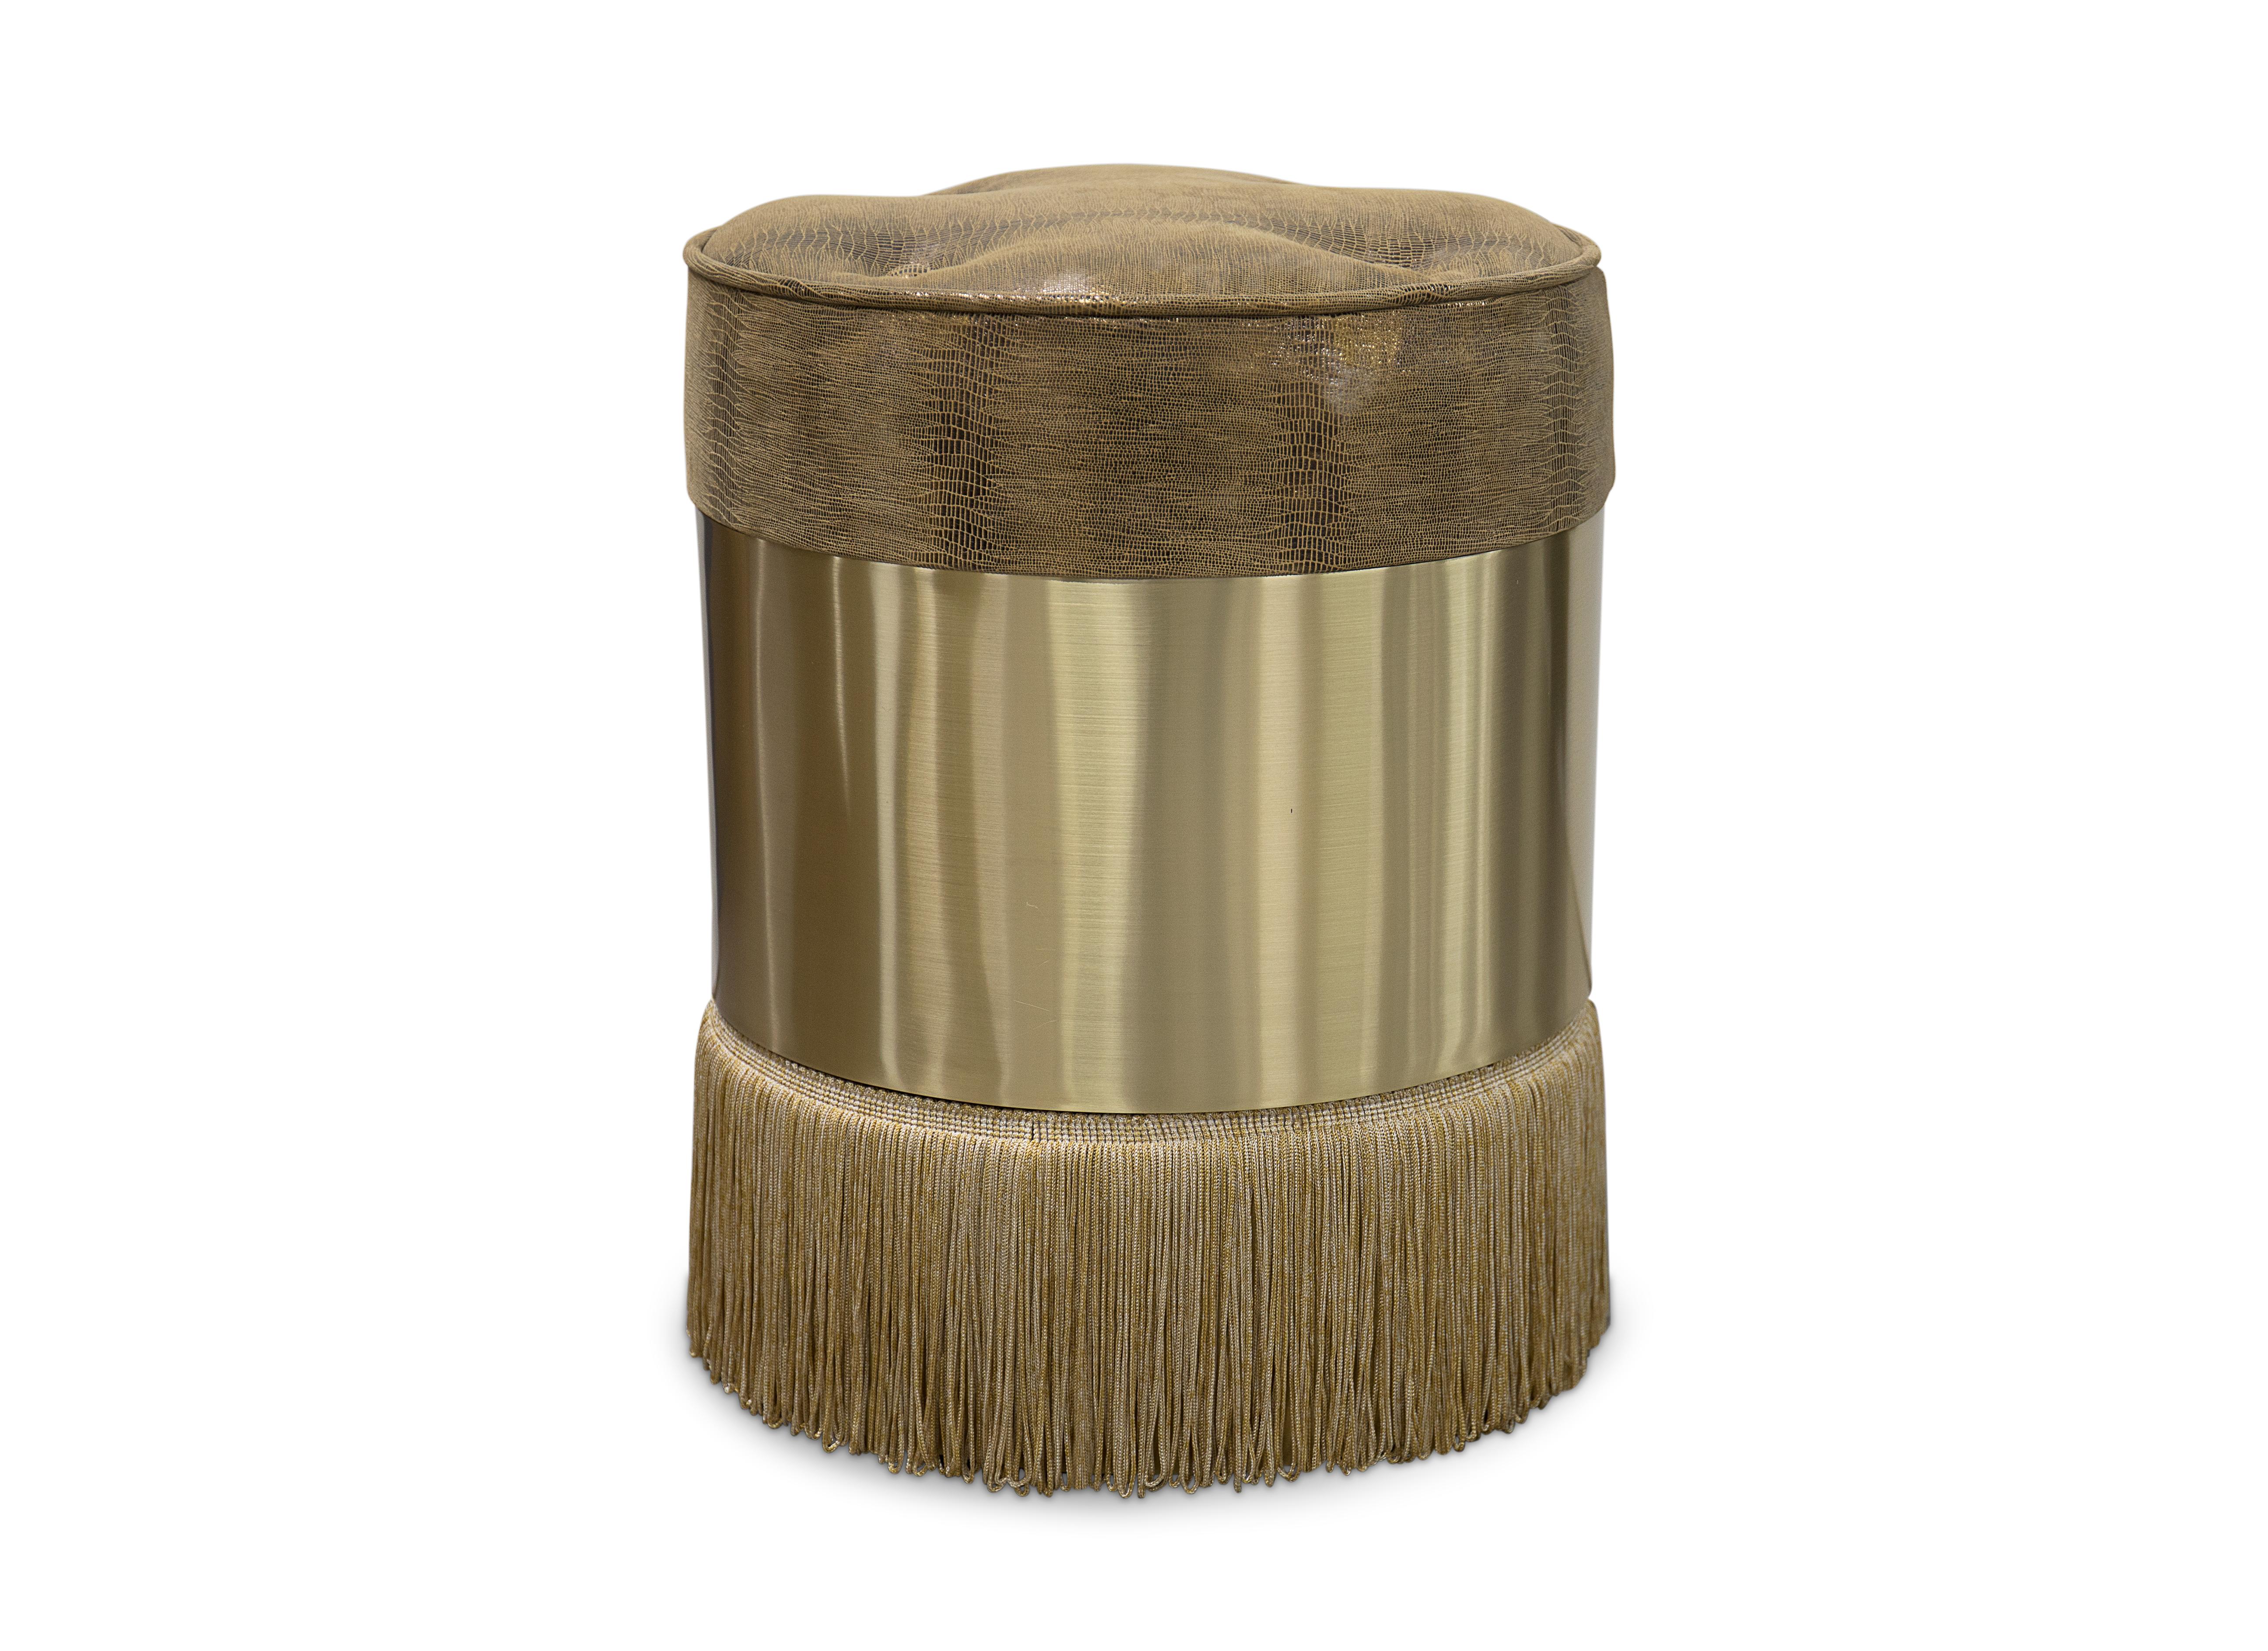 Each of these fashionable pouf stools feature their own unique combination of contrasting materials. One of a trio of Koket pouf designs, the tailored button tufted seats, polish brass belts and flowing fringed skirts make this lovely lady the